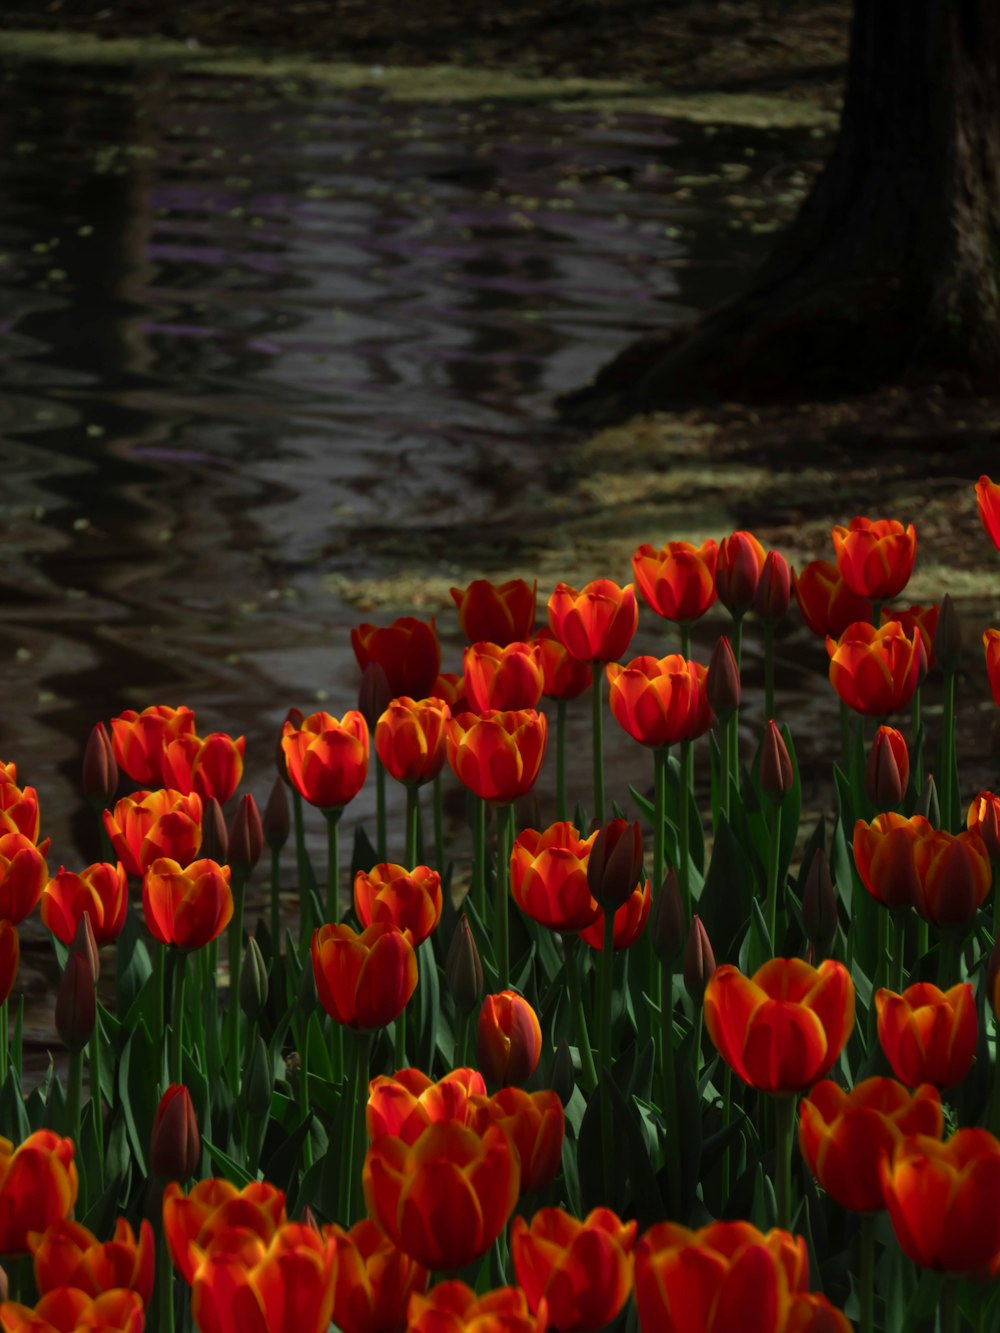 a field of red and yellow tulips next to a body of water